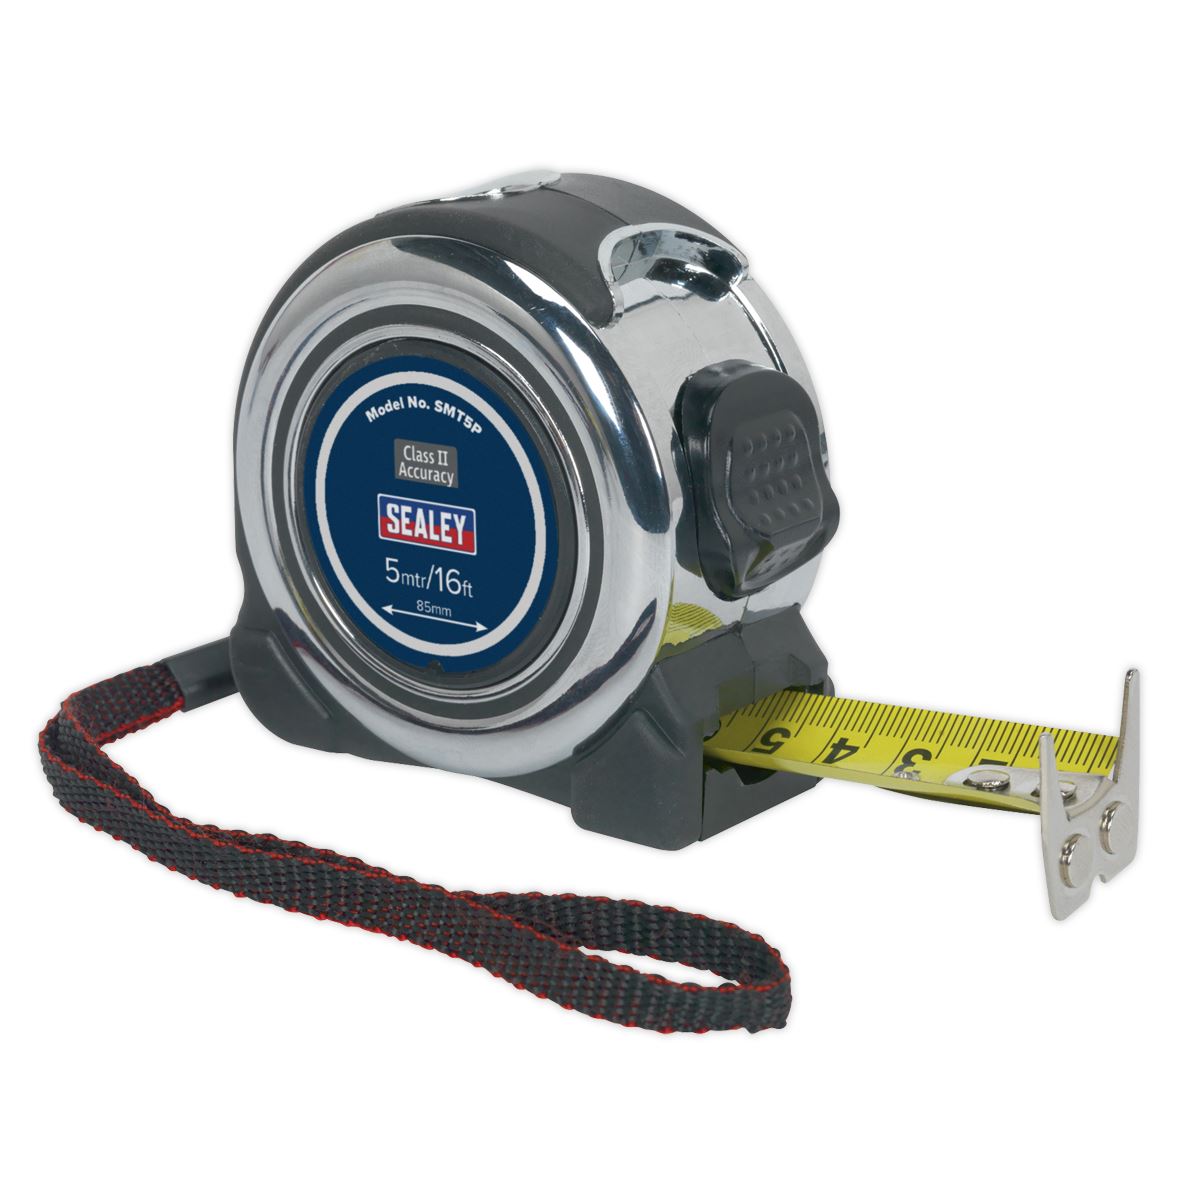 Sealey Professional Tape Measure Chrome Body 5m or 8m